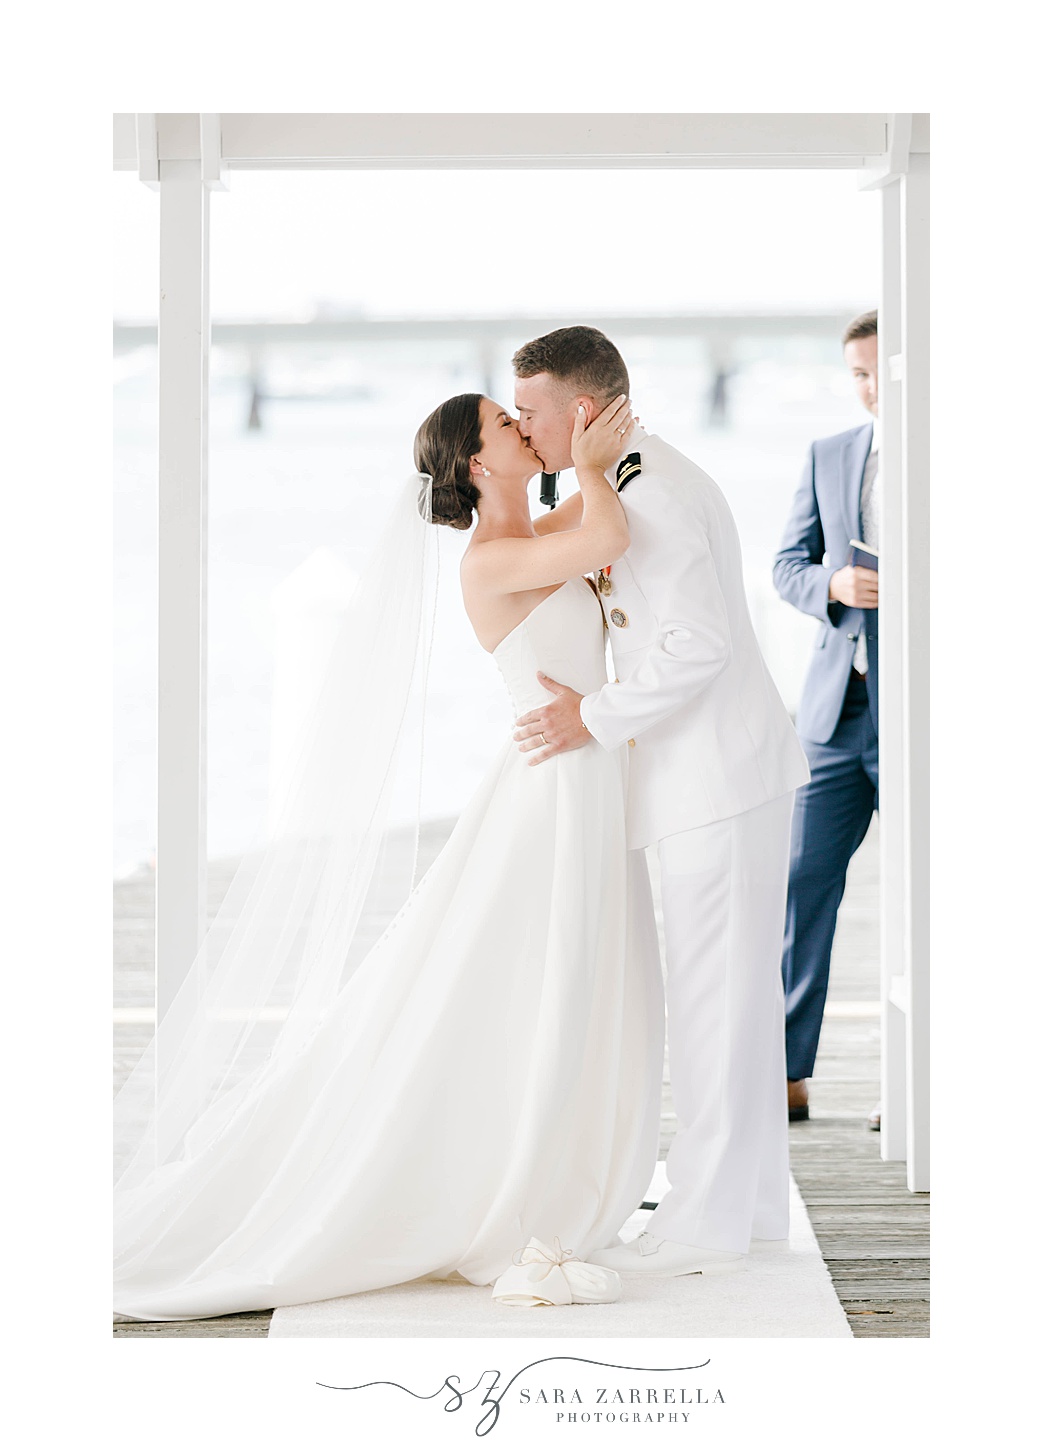 bride and groom kiss during wedding ceremony at Regatta Place